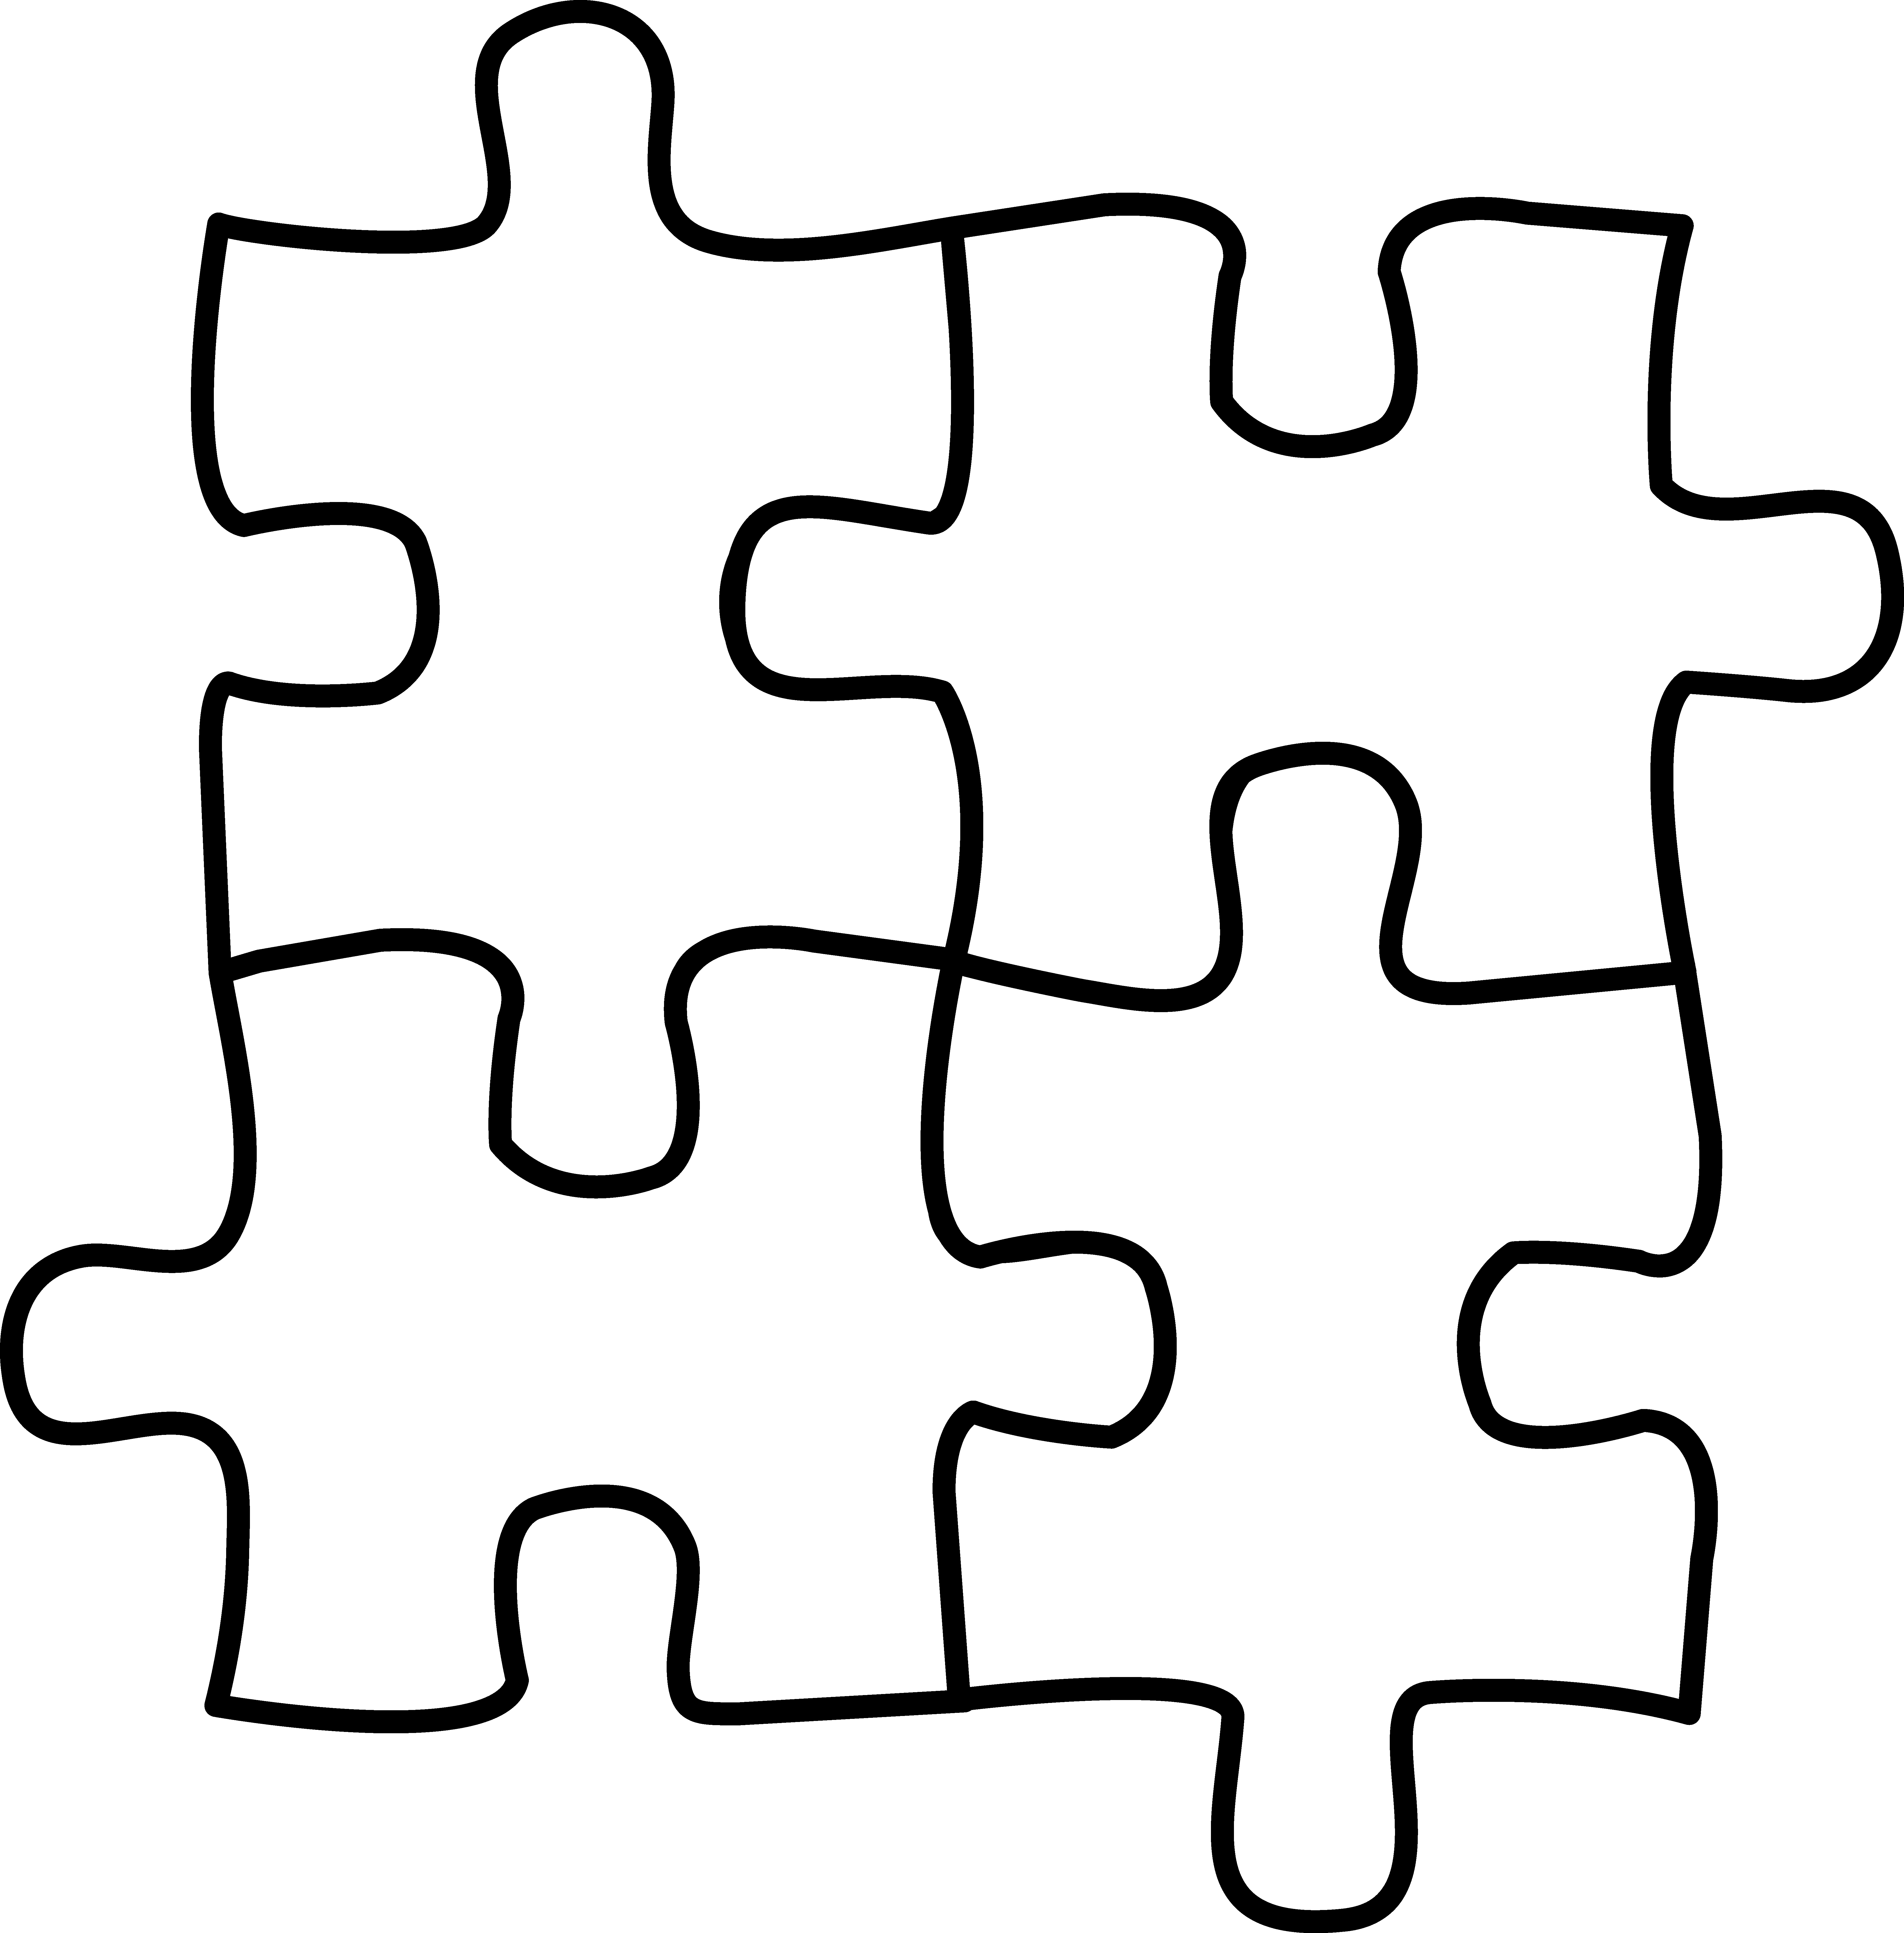 Four Puzzle Pieces For Coloring - Free Clip Art